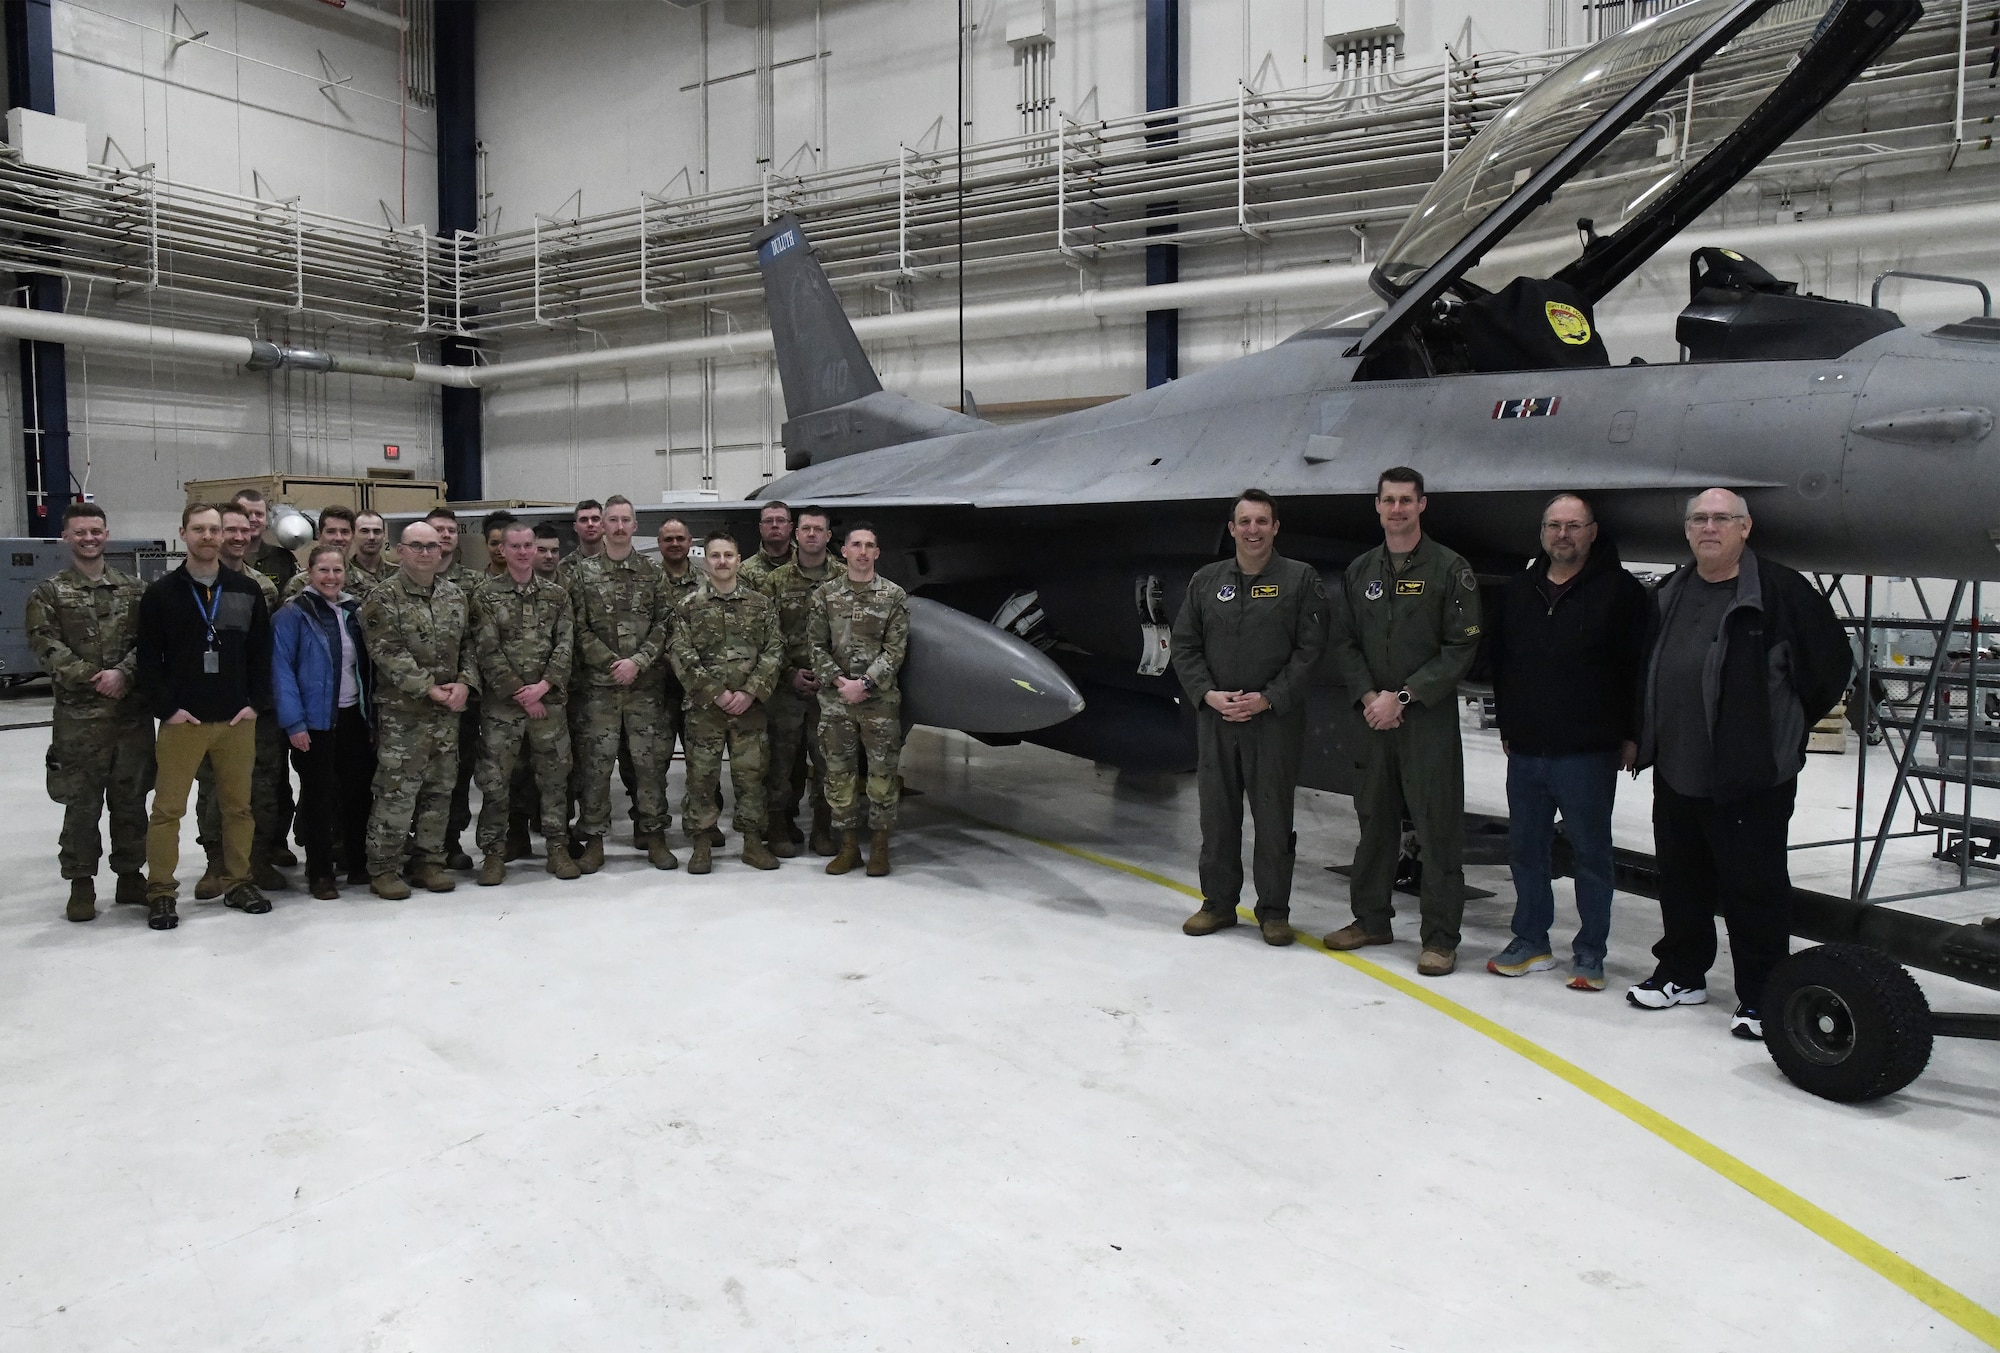 Subject matter experts from Air Combat Command, Air Force Materiel Command, the Air National Guard, Air Force Life Cycle Management Center, Air Force Reserve Test Center (AATC) and 148th Fighter Wing pose for a photo after the first AN/ASQ-236 radar was installed on an Block 50 F-16 Fighting Falcon on January 25, 2023. The 148th Fighter Wing has been designated as the Air National Guard’s Center for Excellence for all F-16 fighter aircraft.